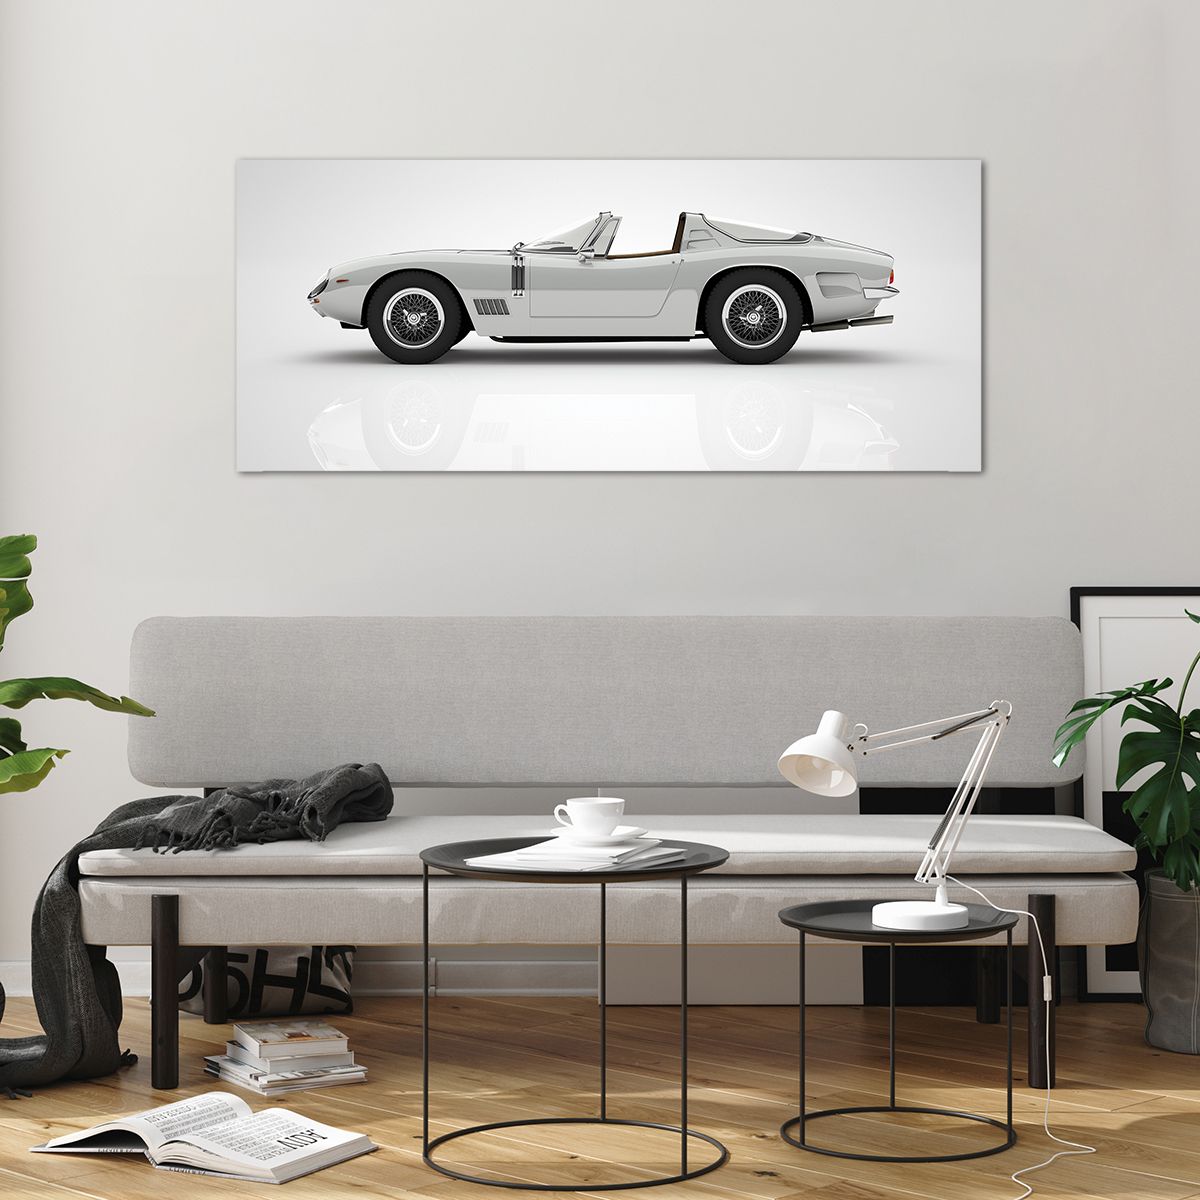 Glass picture  Sports Car, Glass picture  Cabriolet, Glass picture  Automotive, Glass picture  Journey, Glass picture  Vintage